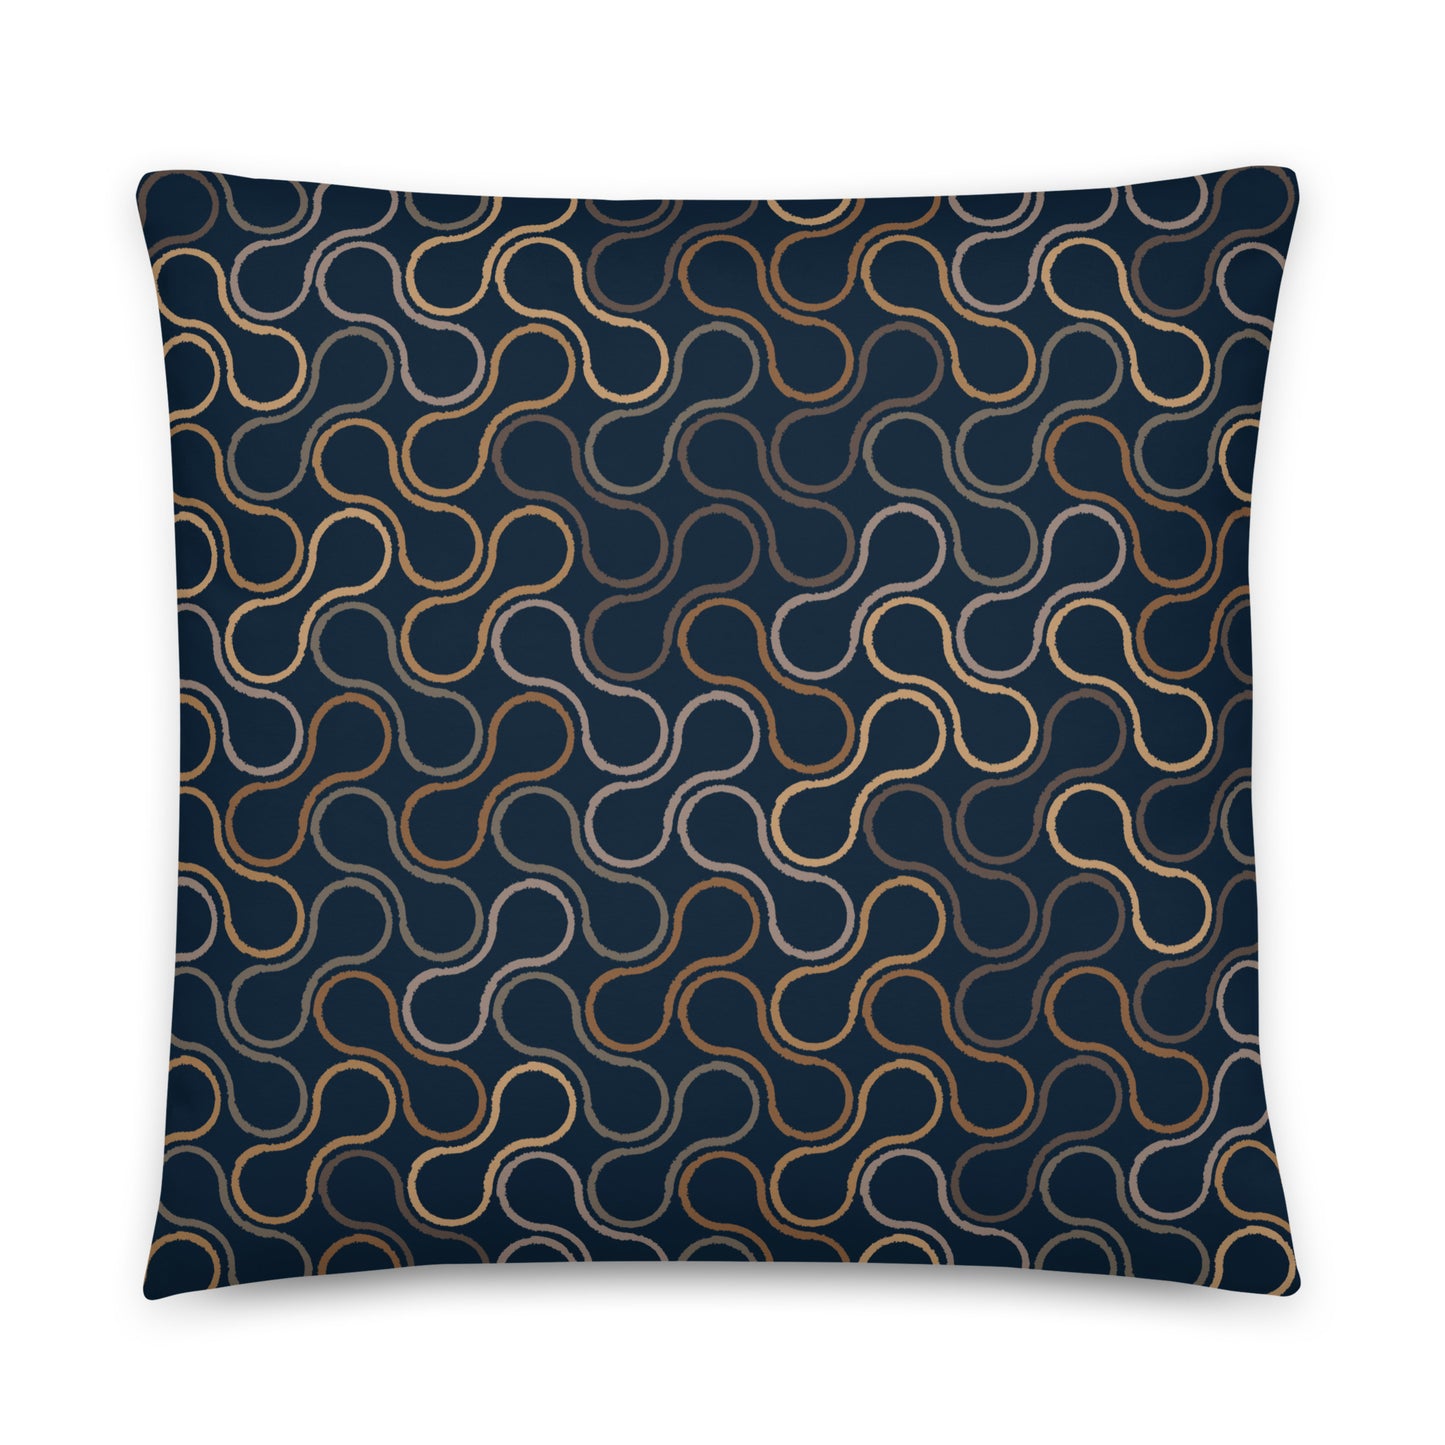 Elegant - Sustainably Made Pillows